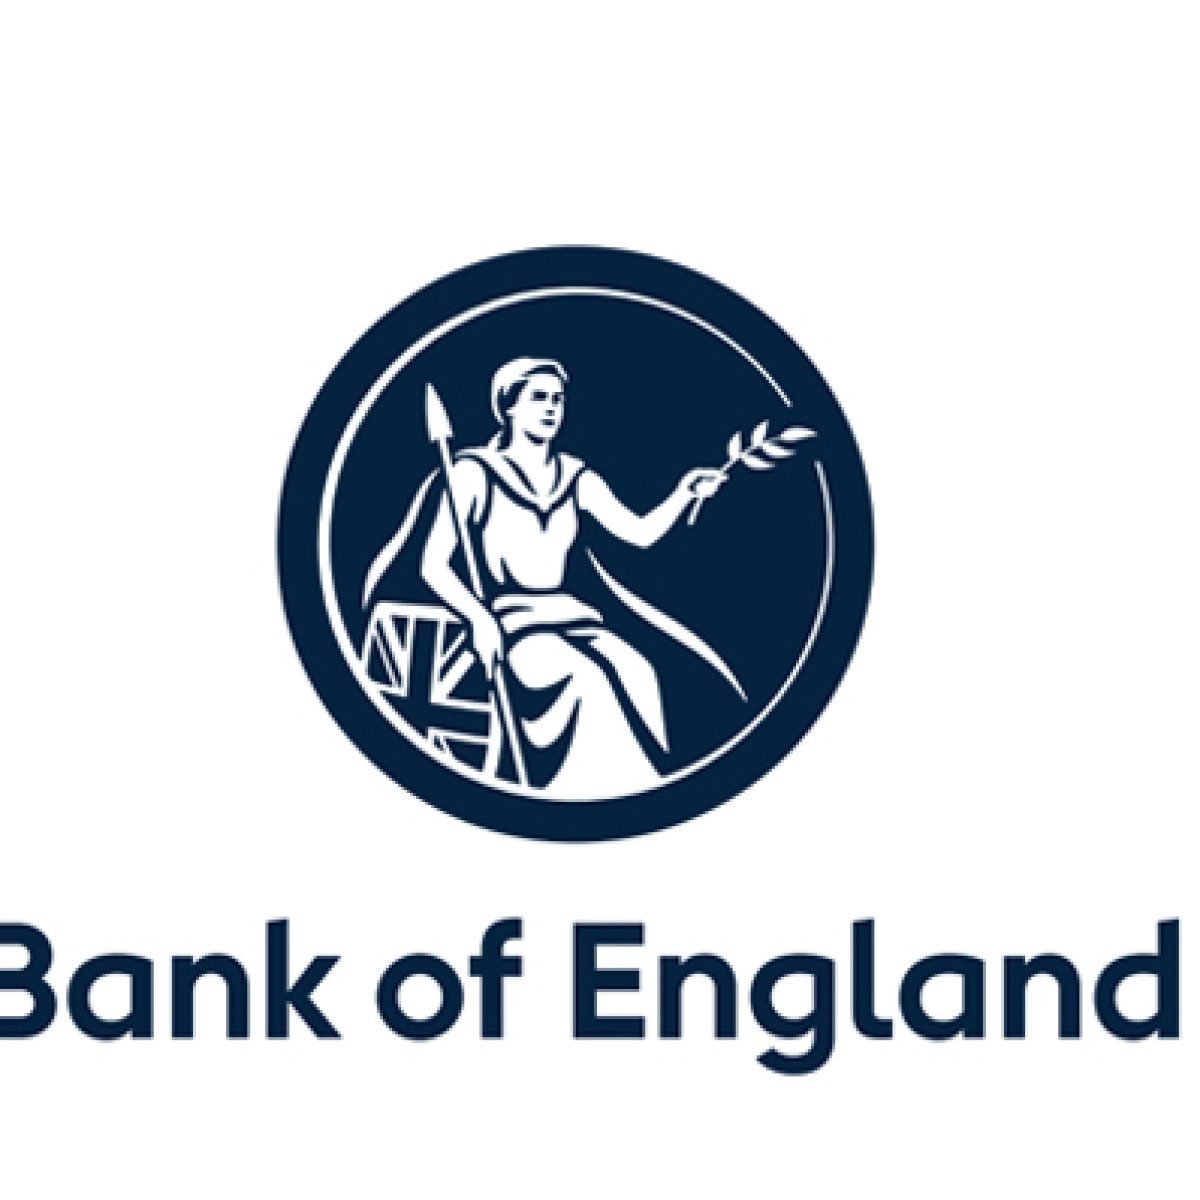 Quick Move Now selected to assist Bank of England research